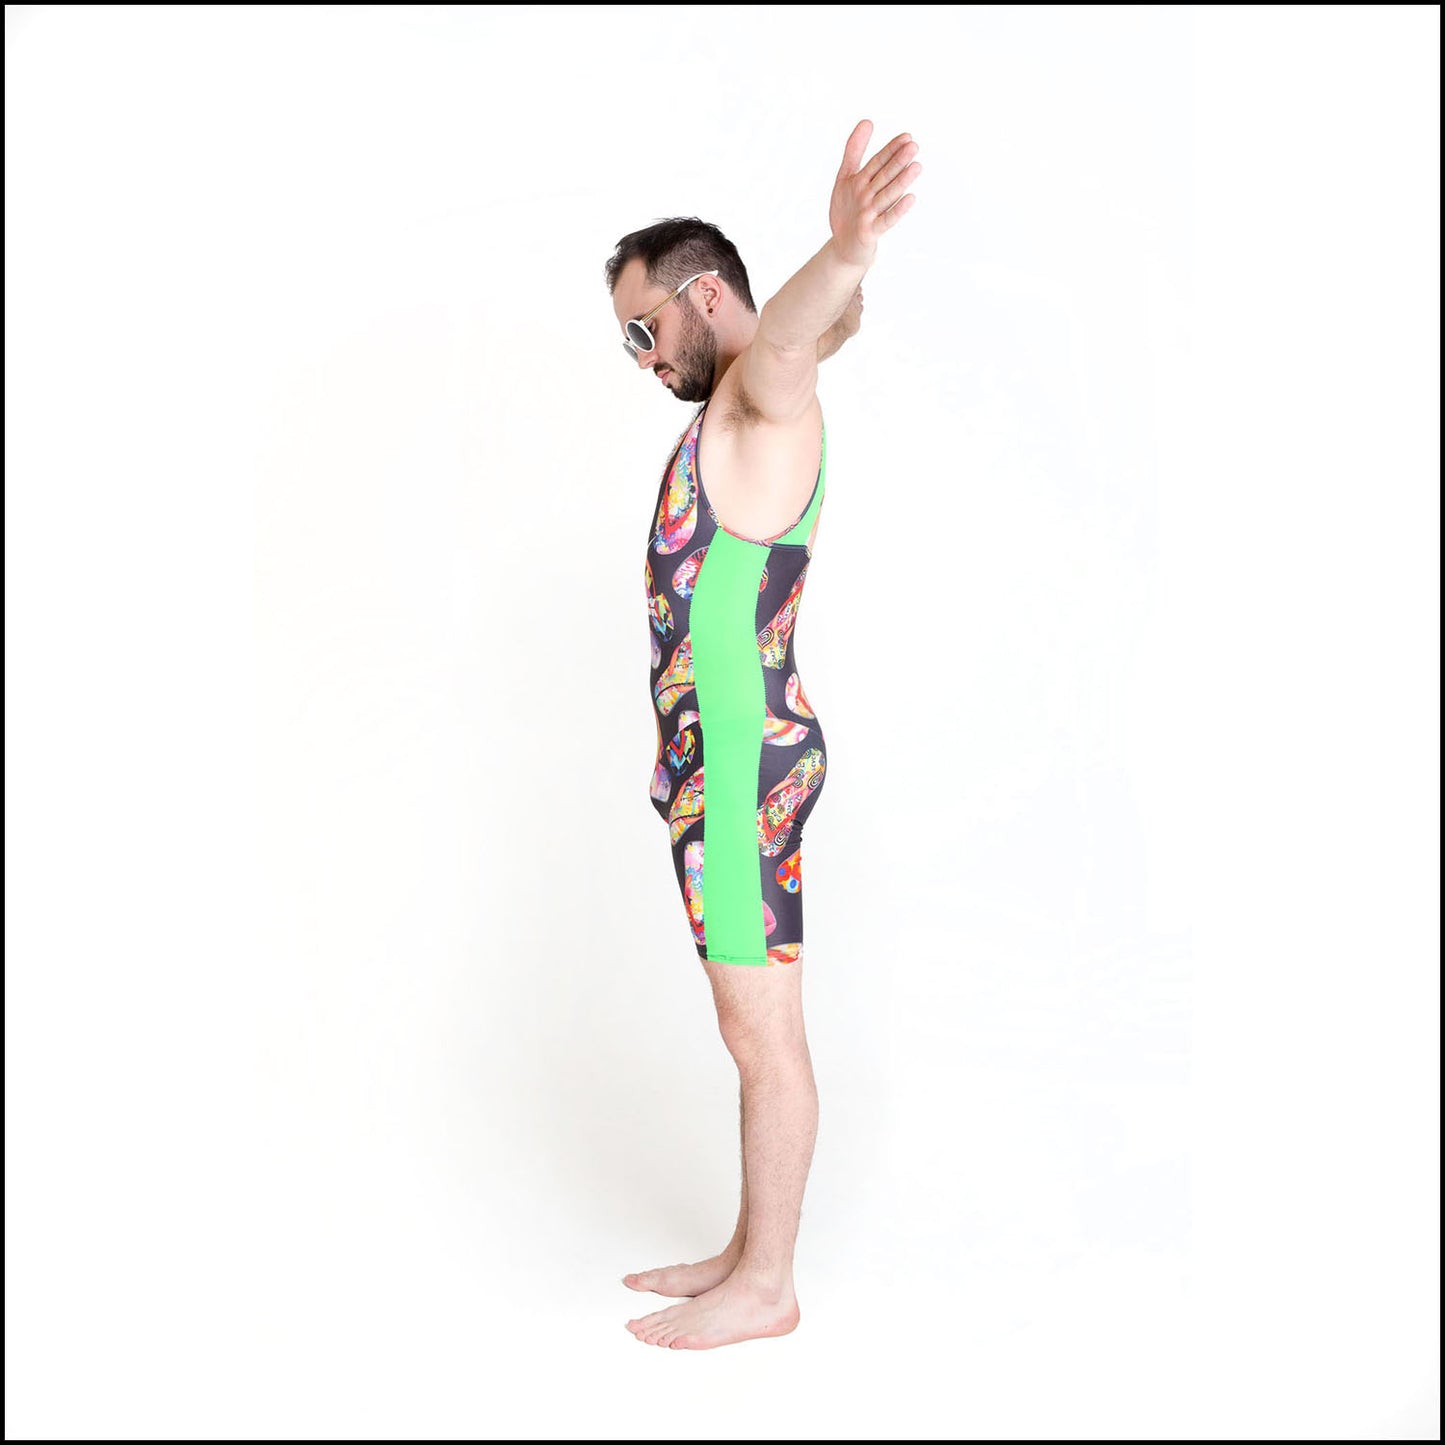 Diverse AF Catsuit. Handmade-to-order using colourful flipflop printed spandex, this tongue-in-cheek, cropped catsuit is both stylish and sustainable. The unisex design features a supportive racer back and figure flattering, neon green, contrast side panels.